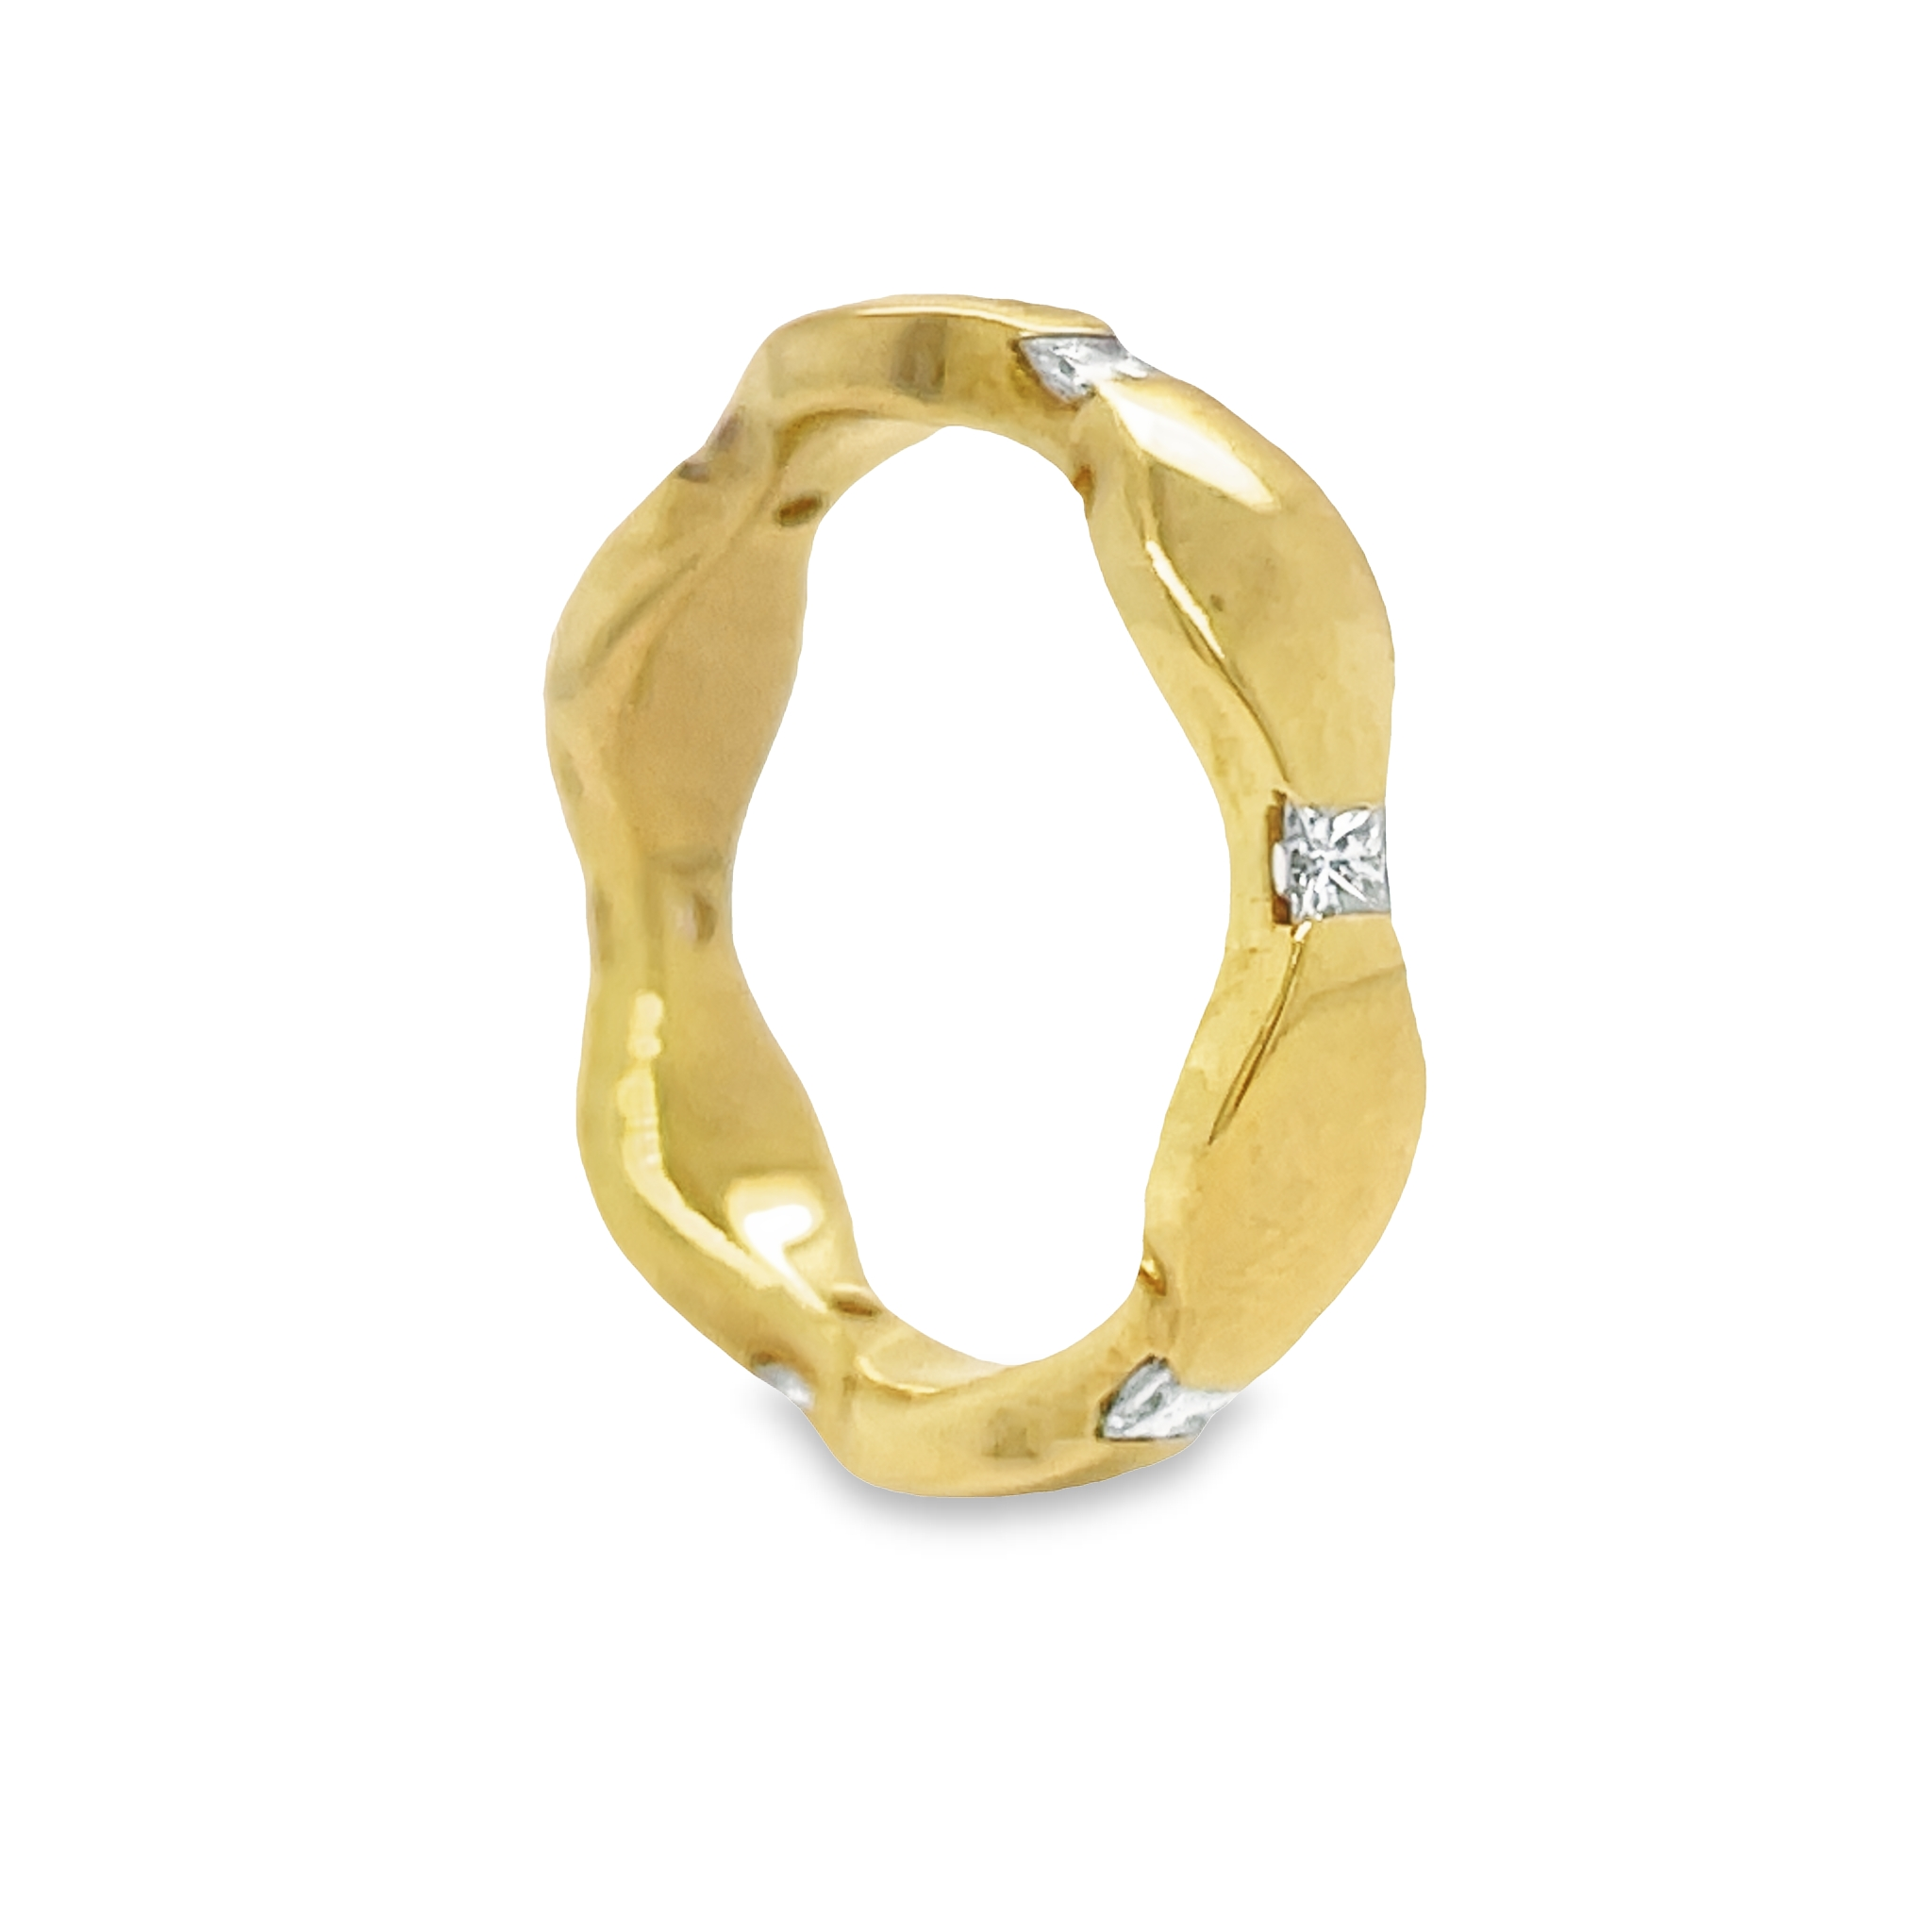 Crafted from 14k yellow gold, the Diamond Wave Stackable Ring is the perfect accessory for any ensemble. This classic piece features six dazzling round diamonds, totaling 0.30 cts, that add an extra touch of sparkle. It's stackable design makes it versatile and elegant.